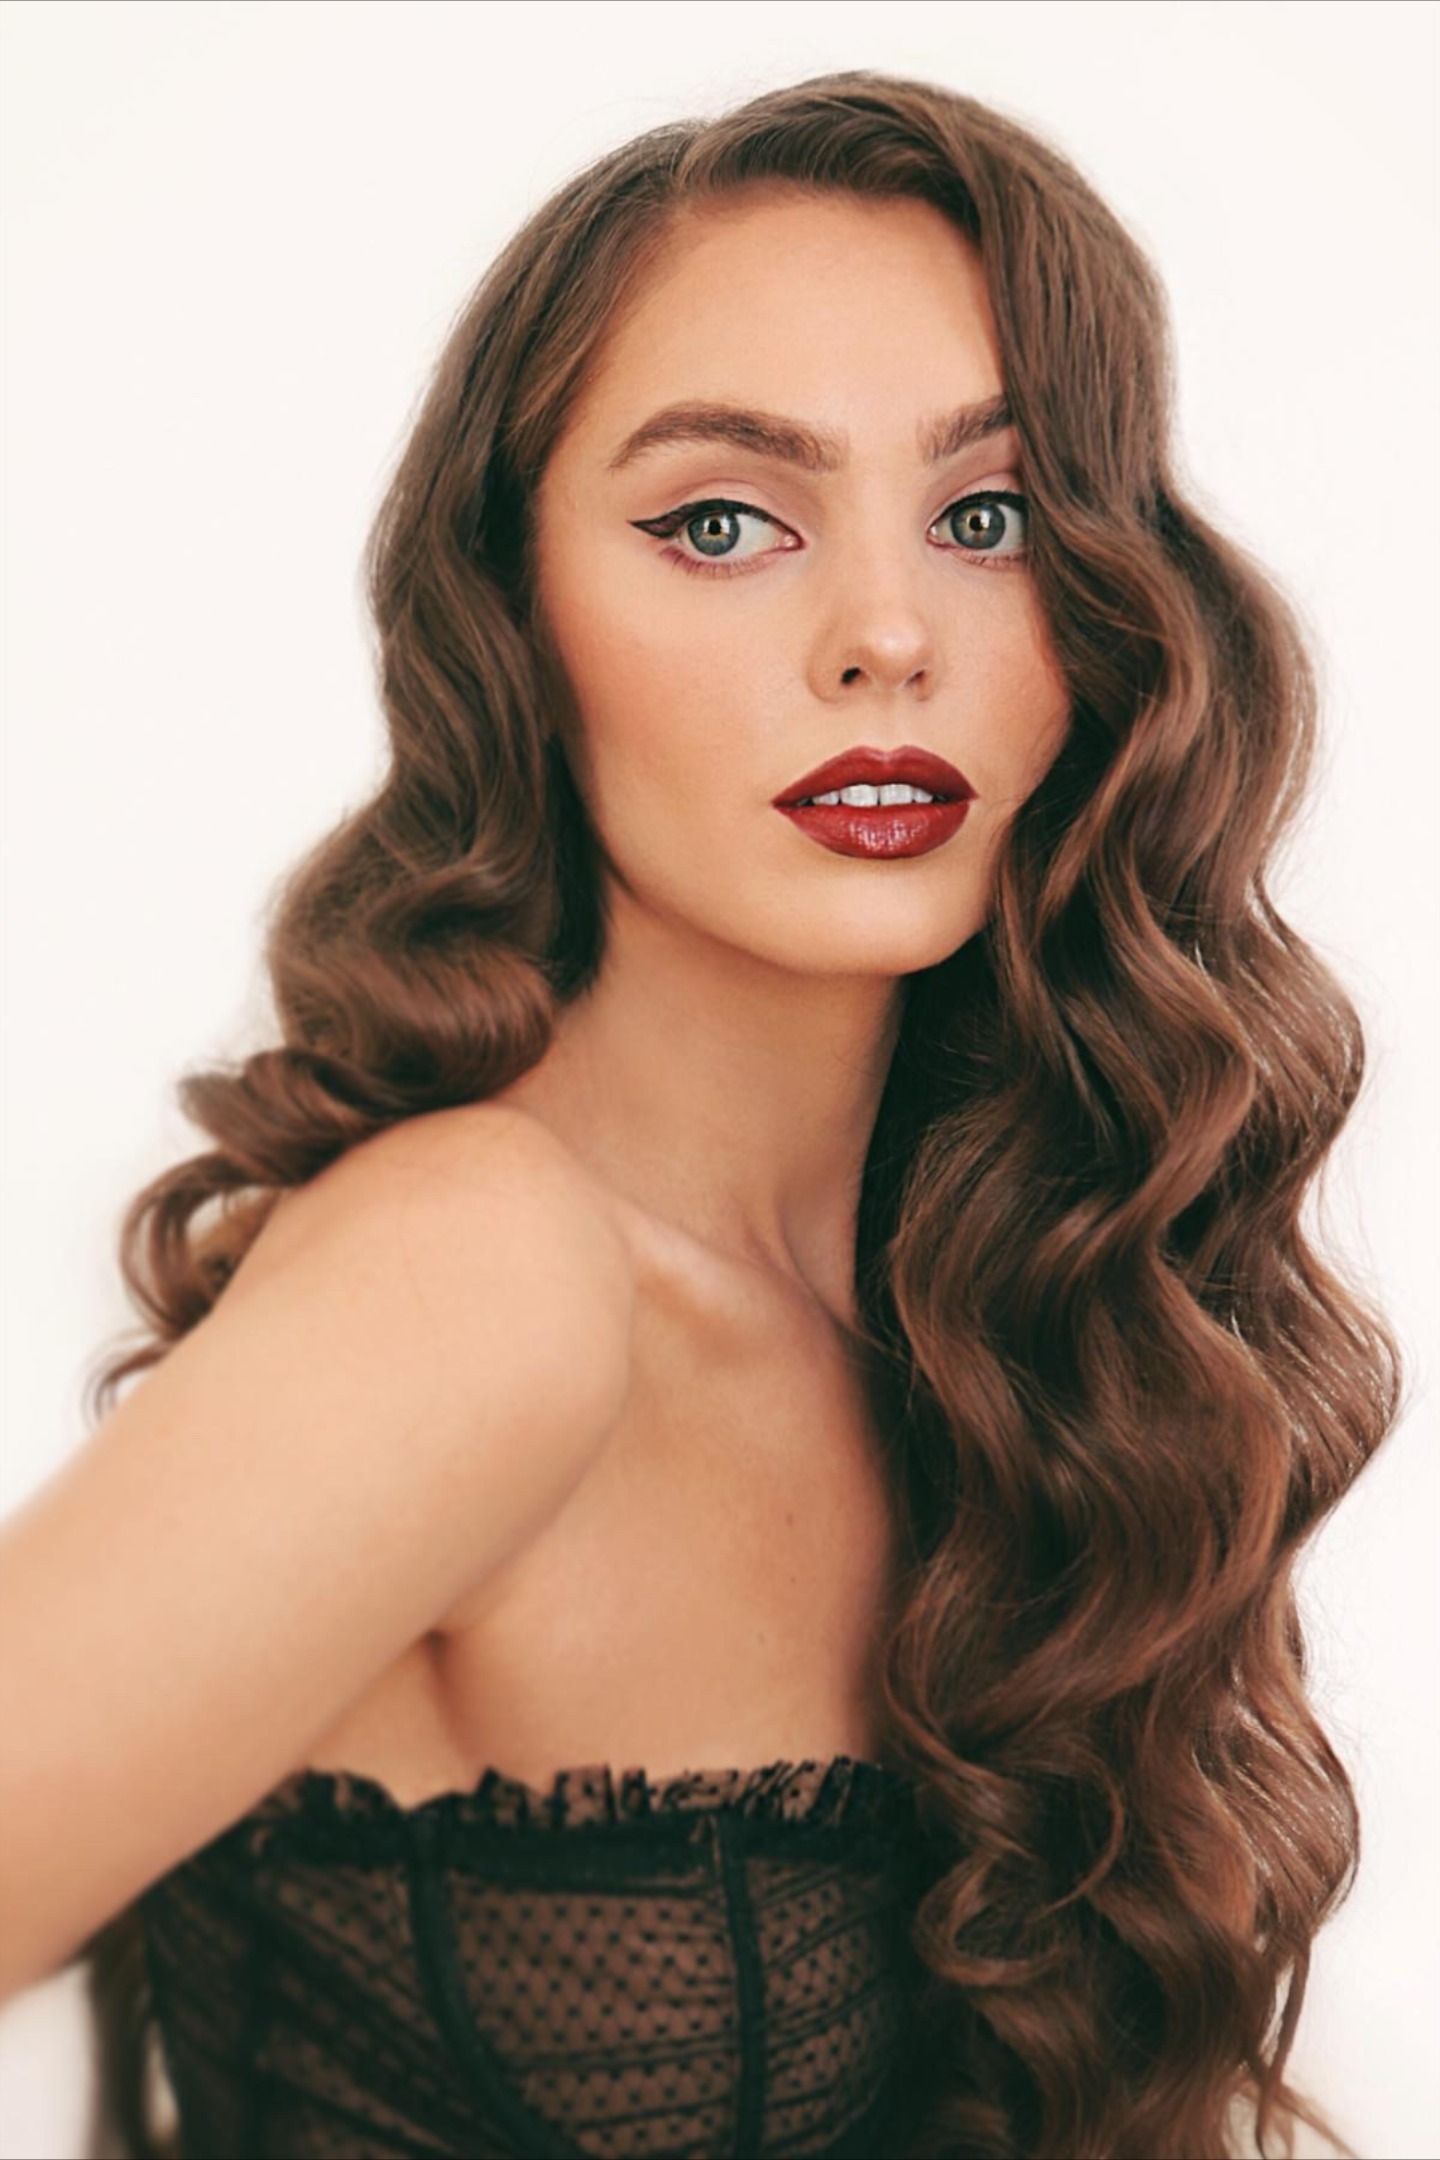 Hollywood Waves Hairstyle